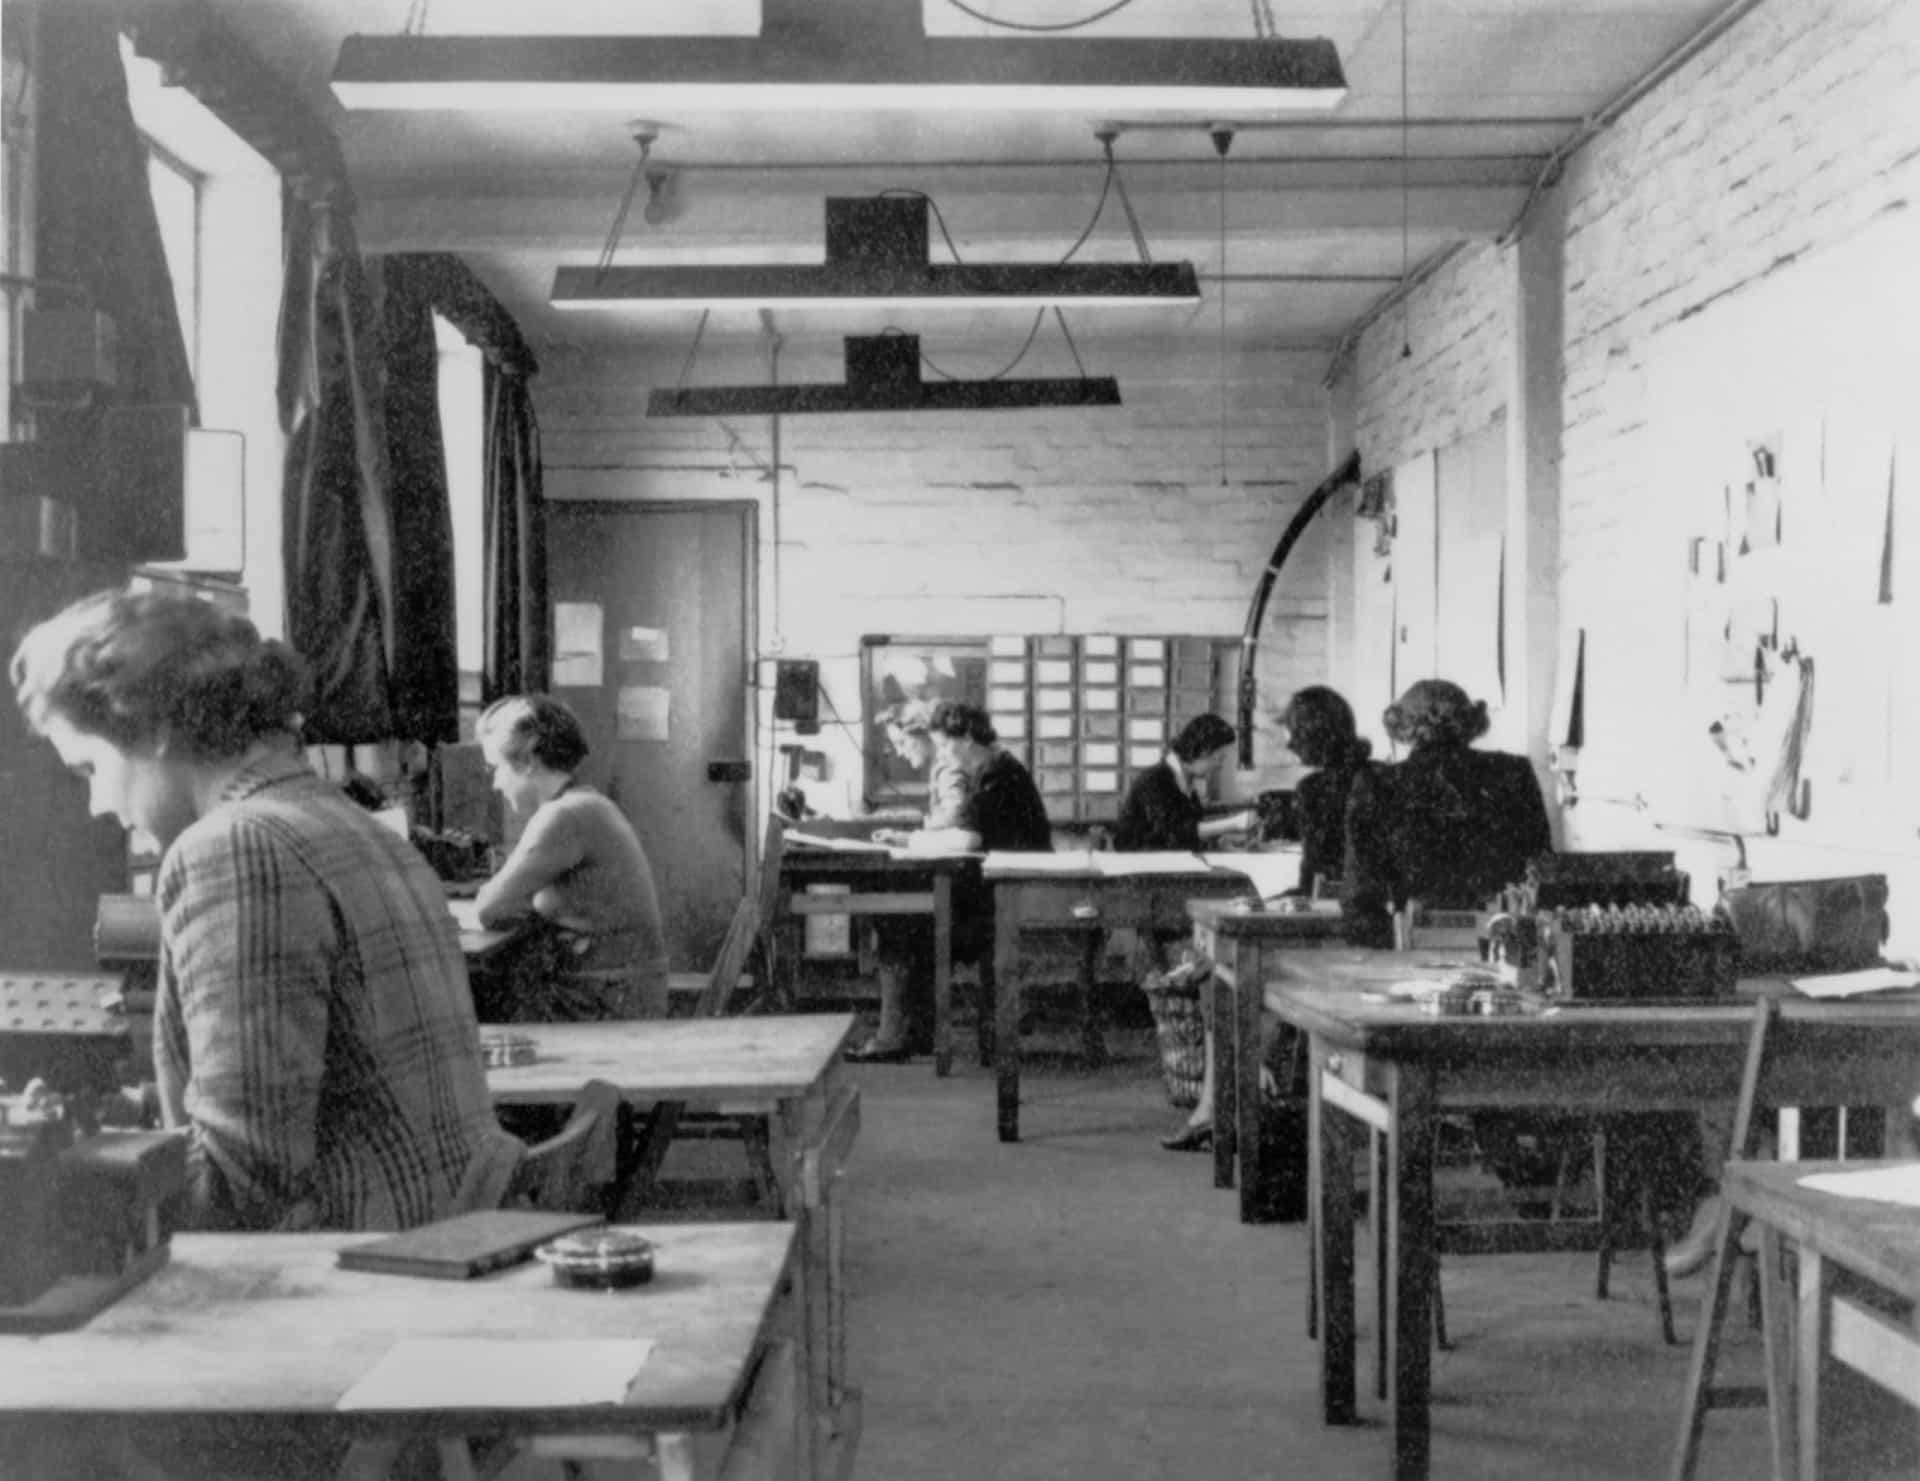 <p>This photograph shows the machine room in hut 6 of Bletchley Park. The cryptographers deciphered top-secret communiques between Hitler and his armed forces. These communiques were encrypted in the Enigma code, which the Germans considered unbreakable but the codebreakers at Bletchley cracked with the help of 'Bombe' machines like Colossus, the world's first electronic programmable <a href="https://www.starsinsider.com/lifestyle/492054/womens-inventions-and-discoveries-that-were-credited-to-men" rel="noopener">computer</a>, which decoded the even more sophisticated Lorenz cipher, and so aided the Allies to victory.</p><p>You may also like:<a href="https://www.starsinsider.com/n/164411?utm_source=msn.com&utm_medium=display&utm_campaign=referral_description&utm_content=517253en-us"> Nazaré: the biggest waves in the world</a></p>